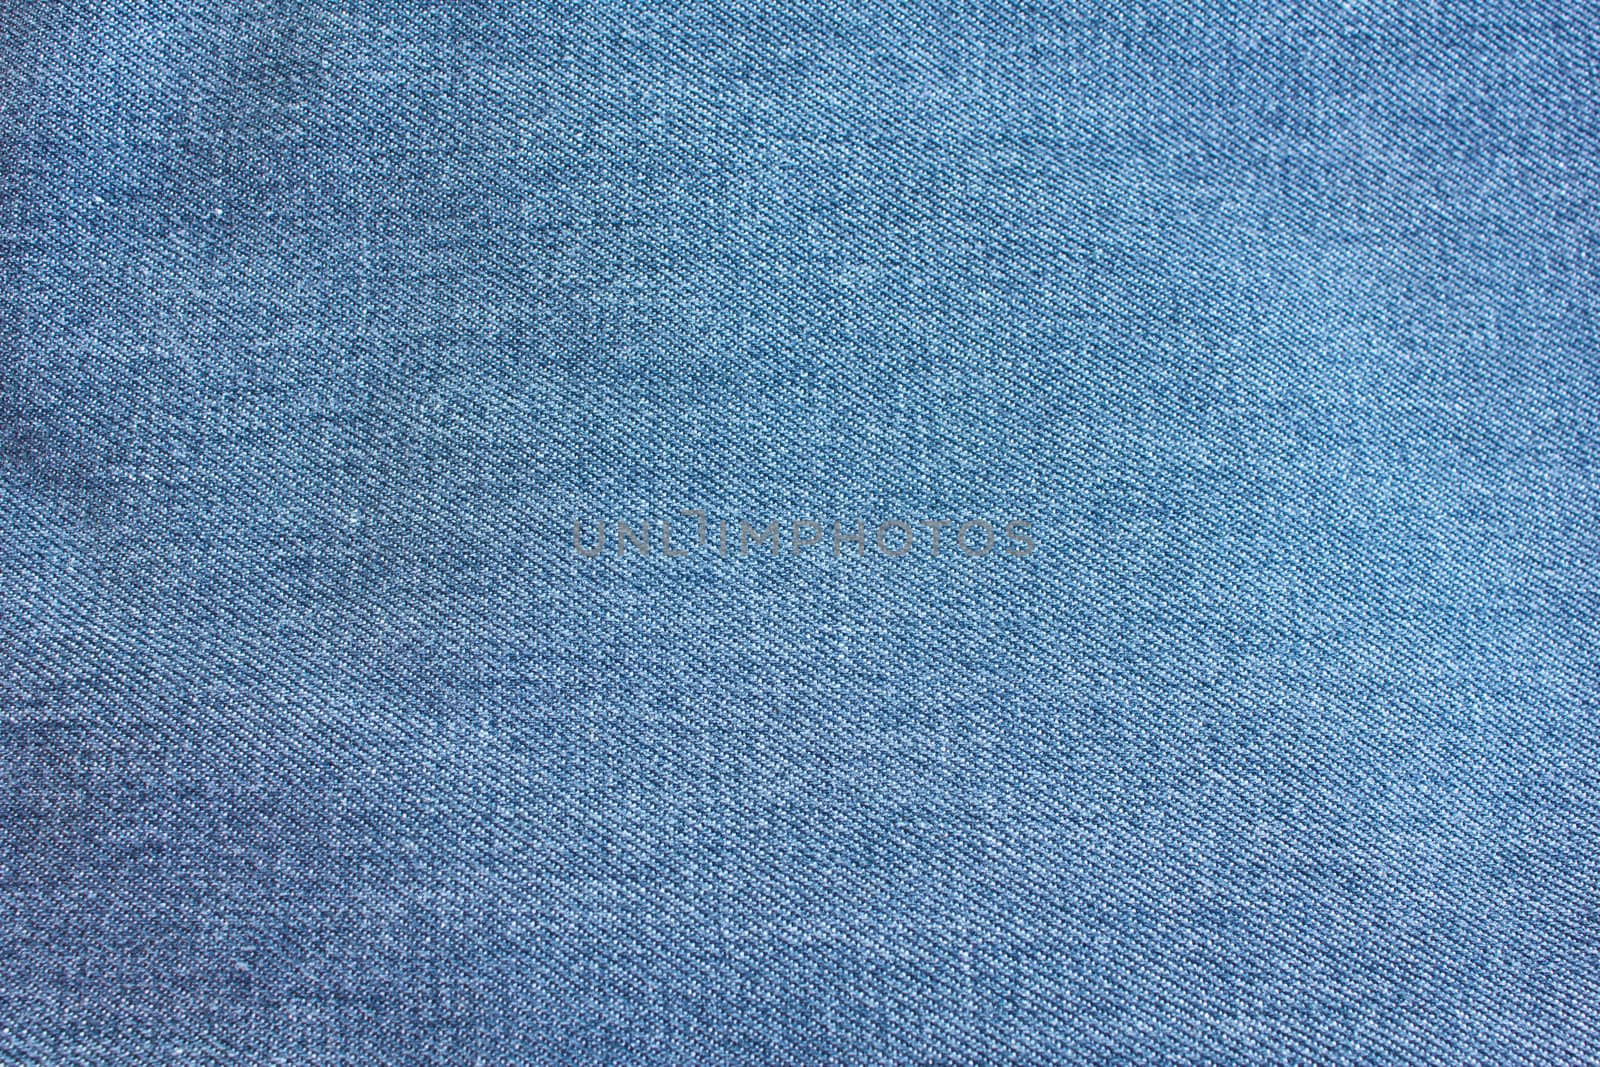 blue jean cloth texture background by singkamc